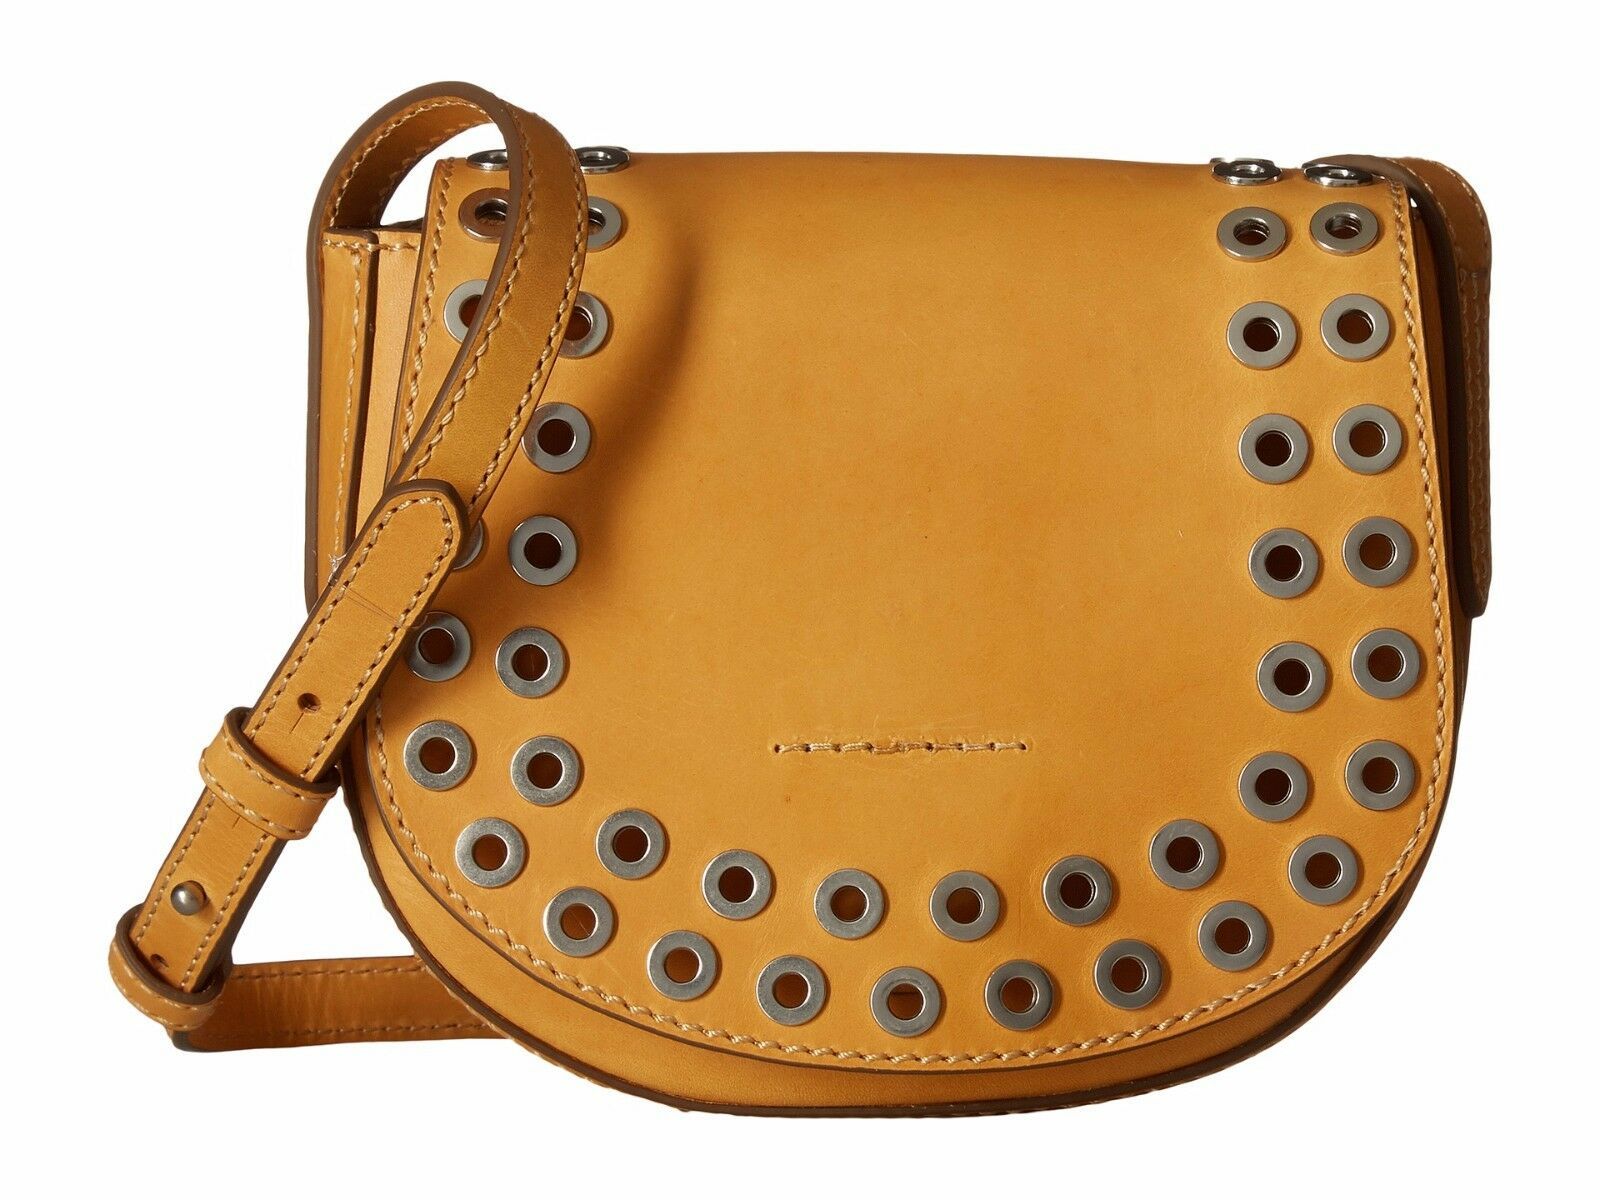 New Frye Women's Cassidy Grommet Leather Saddle Crossbody Bag Variety Colors